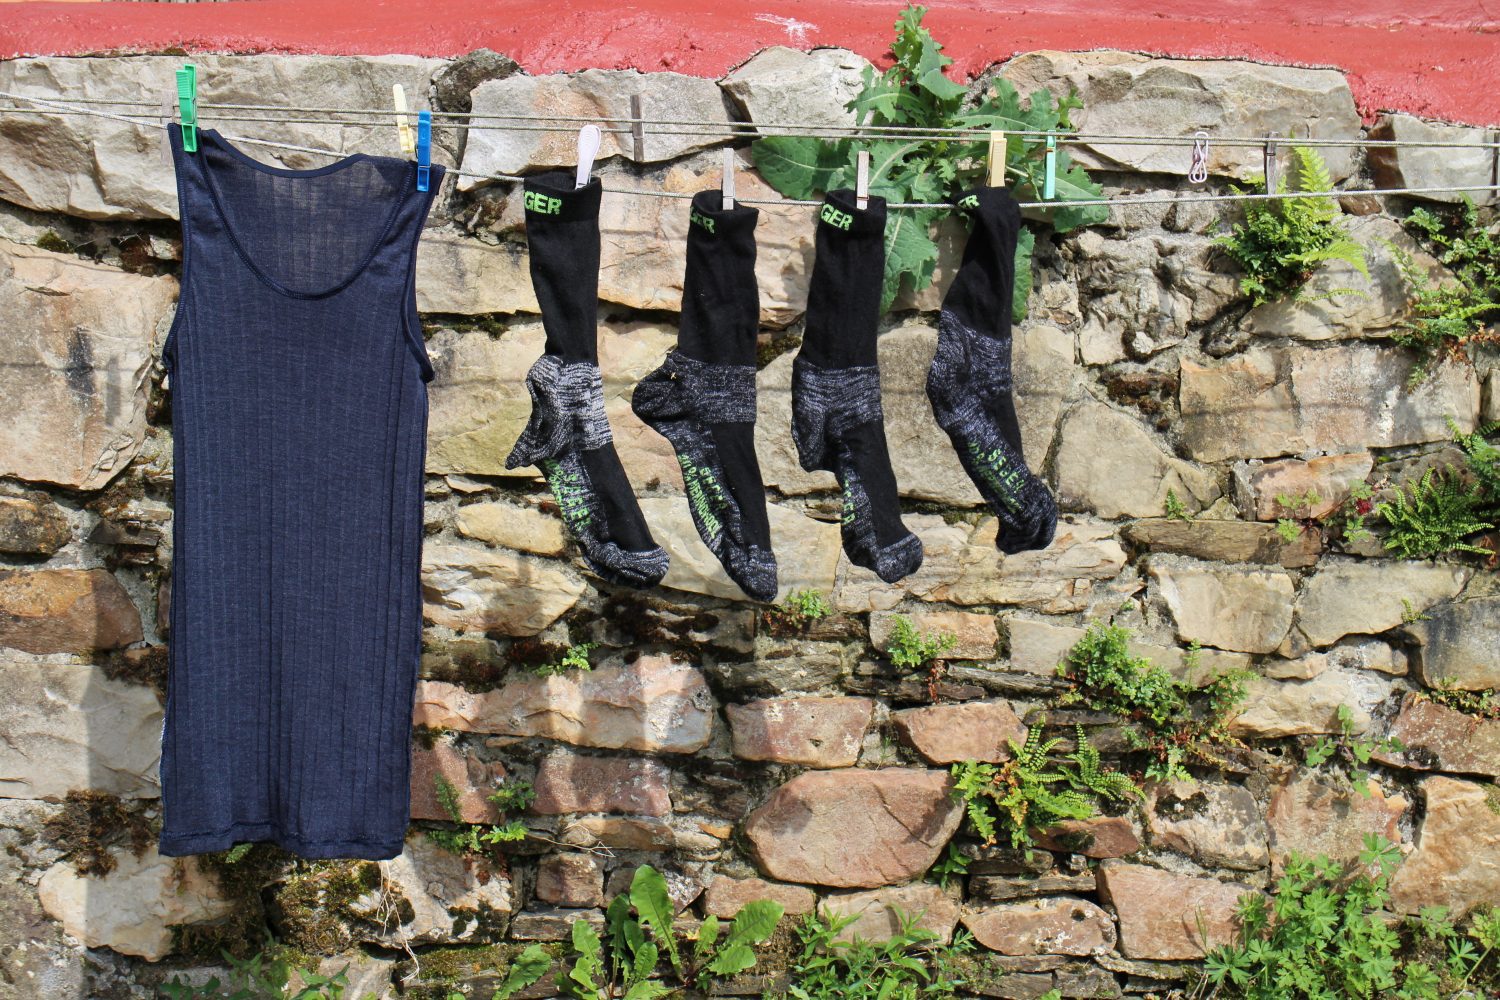 Washing and drying clothes on the camino